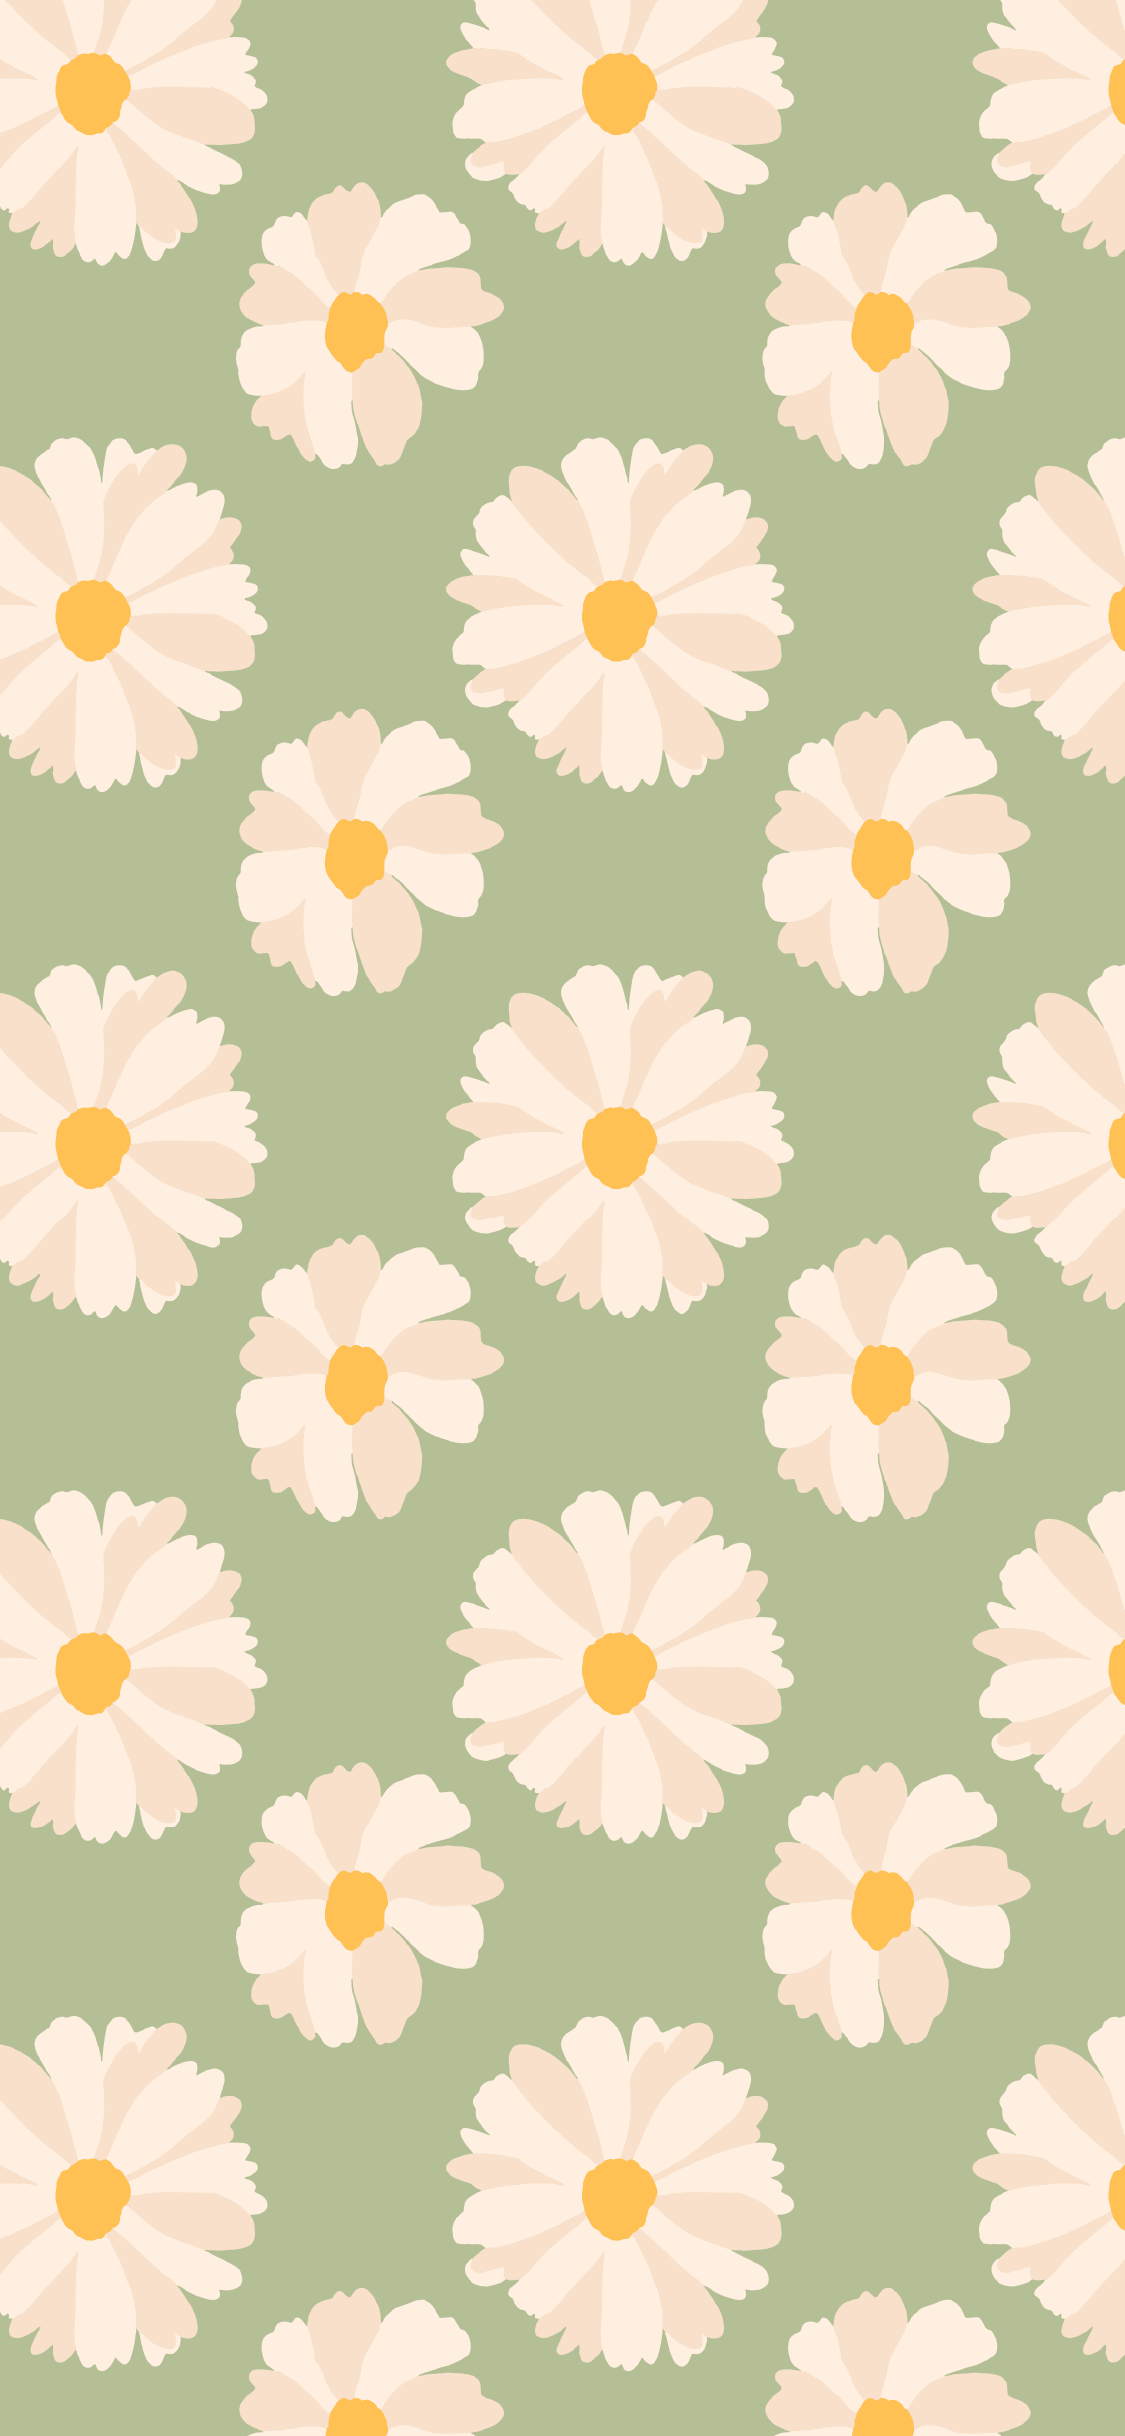 iPhone Wallpaper for Spring 2020 and Ivory